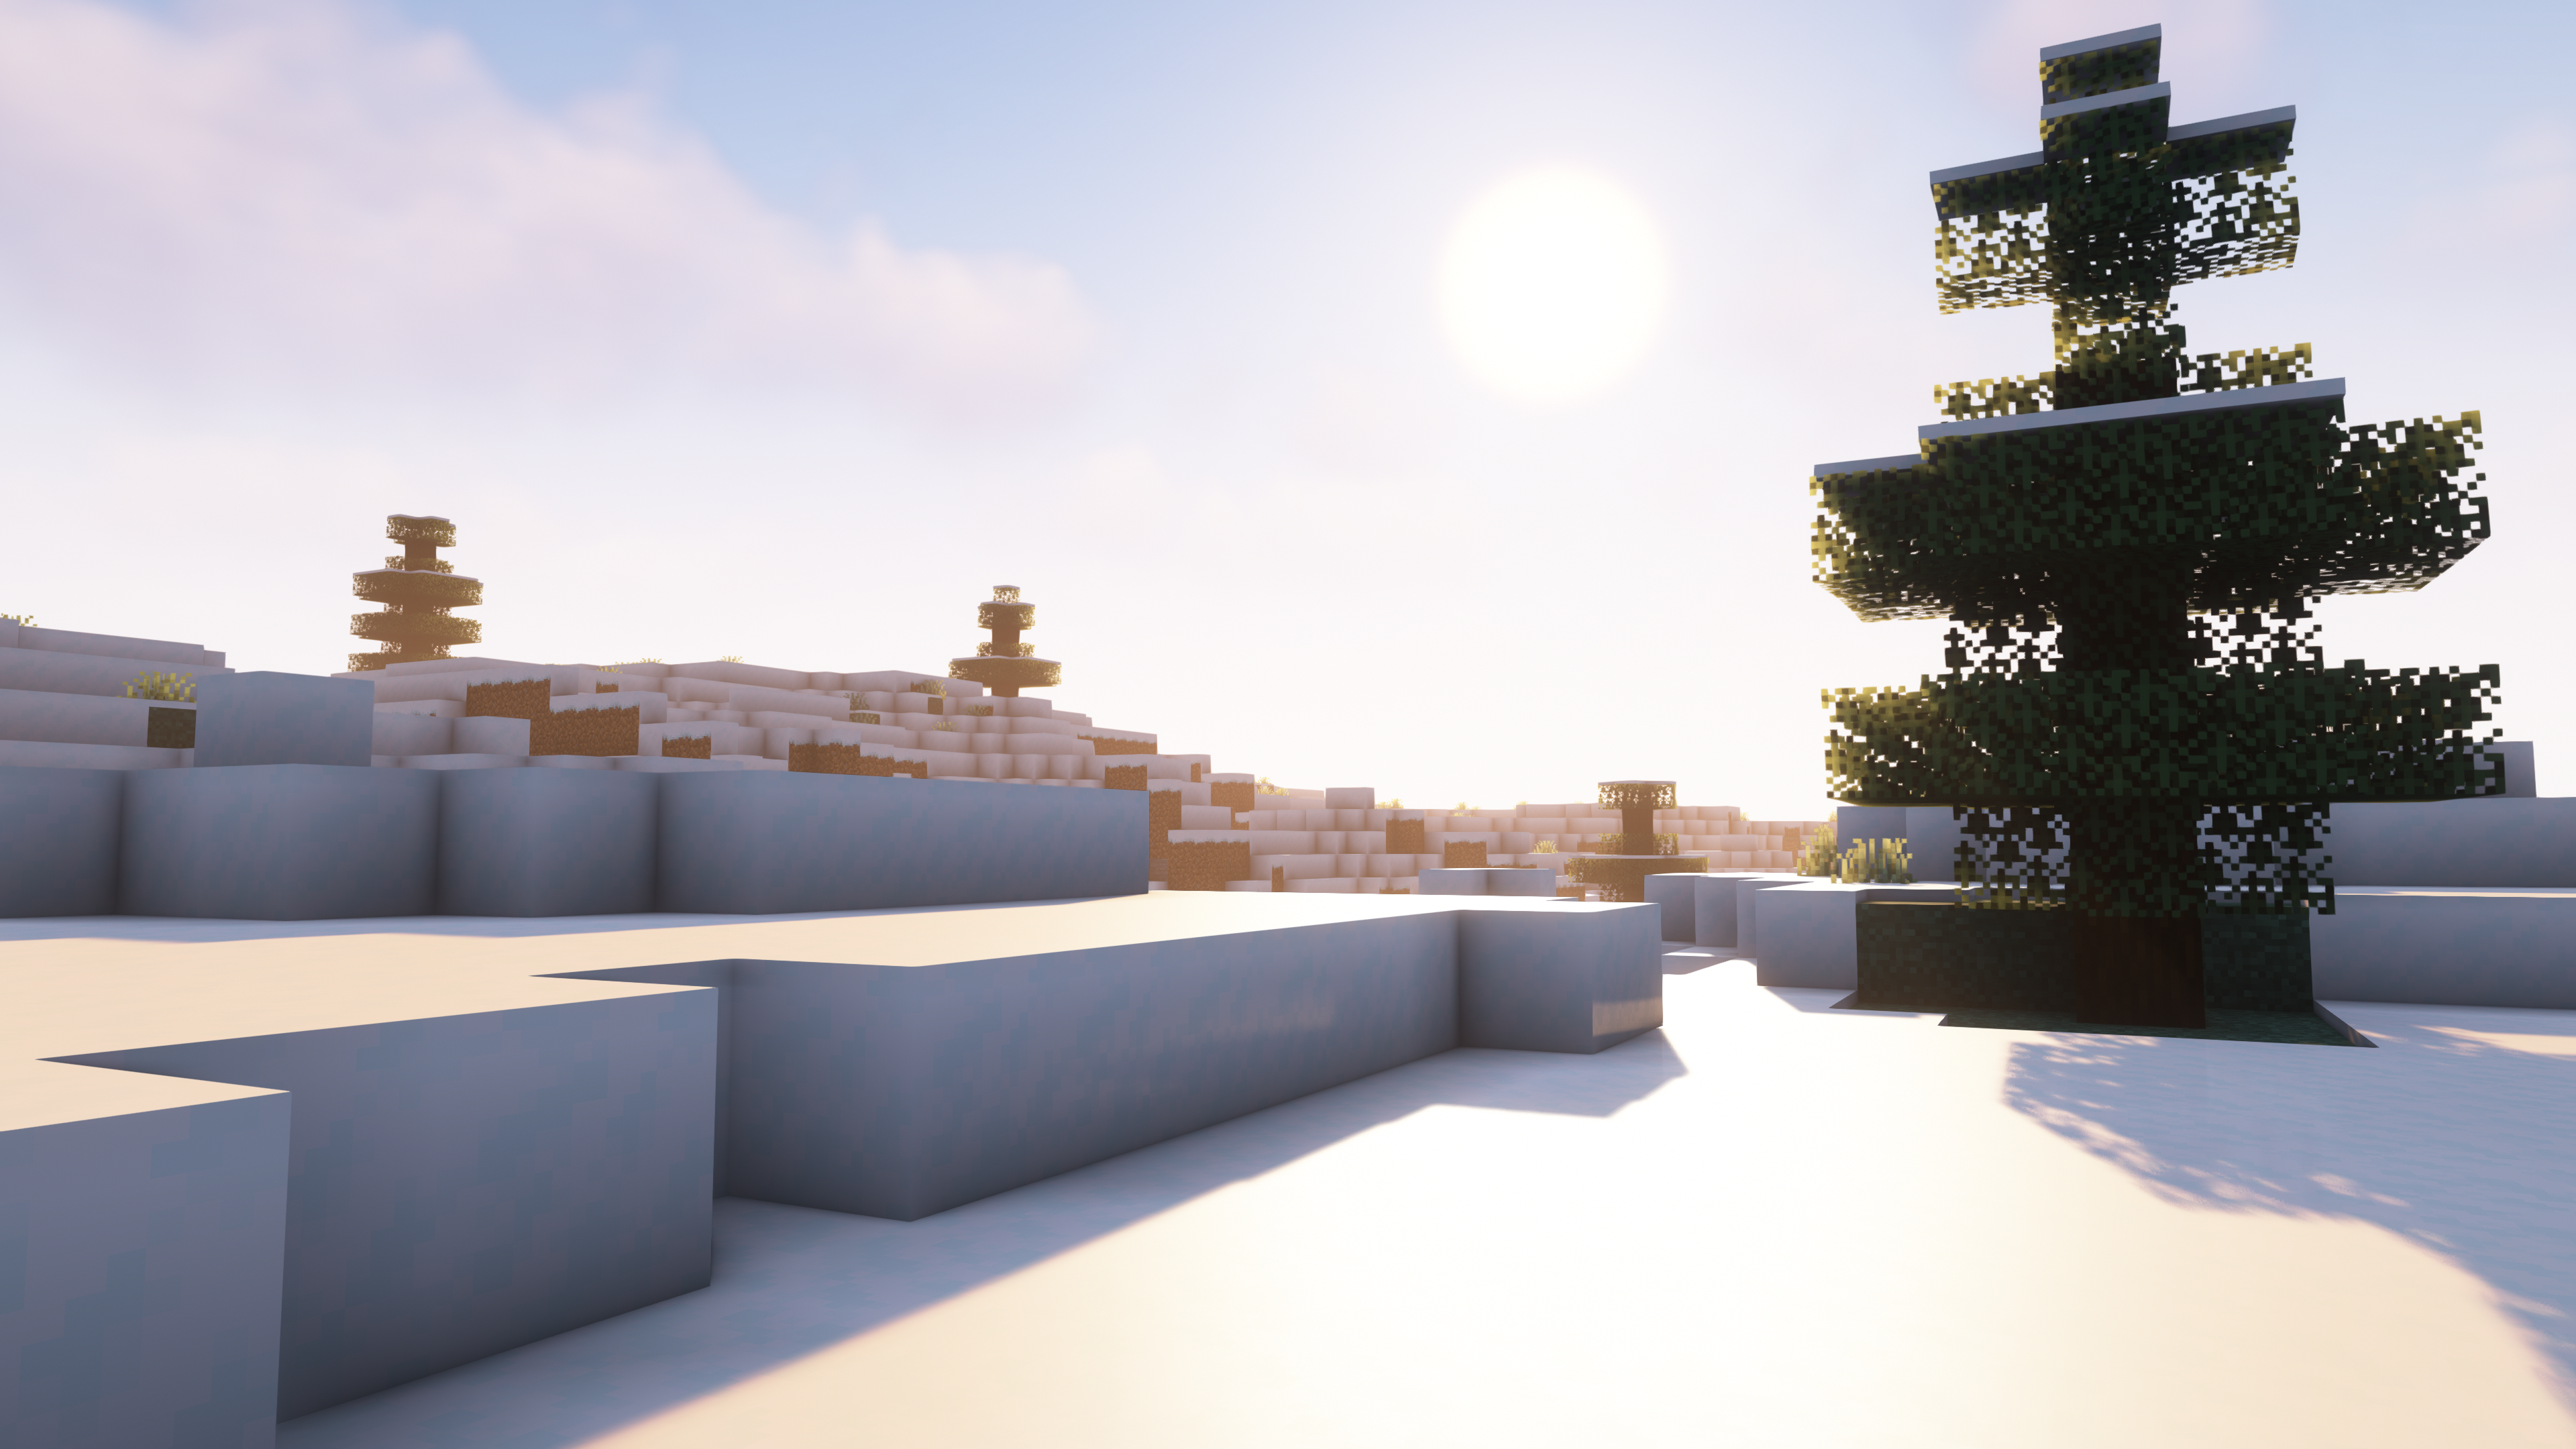 General 3840x2160 Minecraft sunlight snow covered snow pine trees video games cube sky clouds CGI